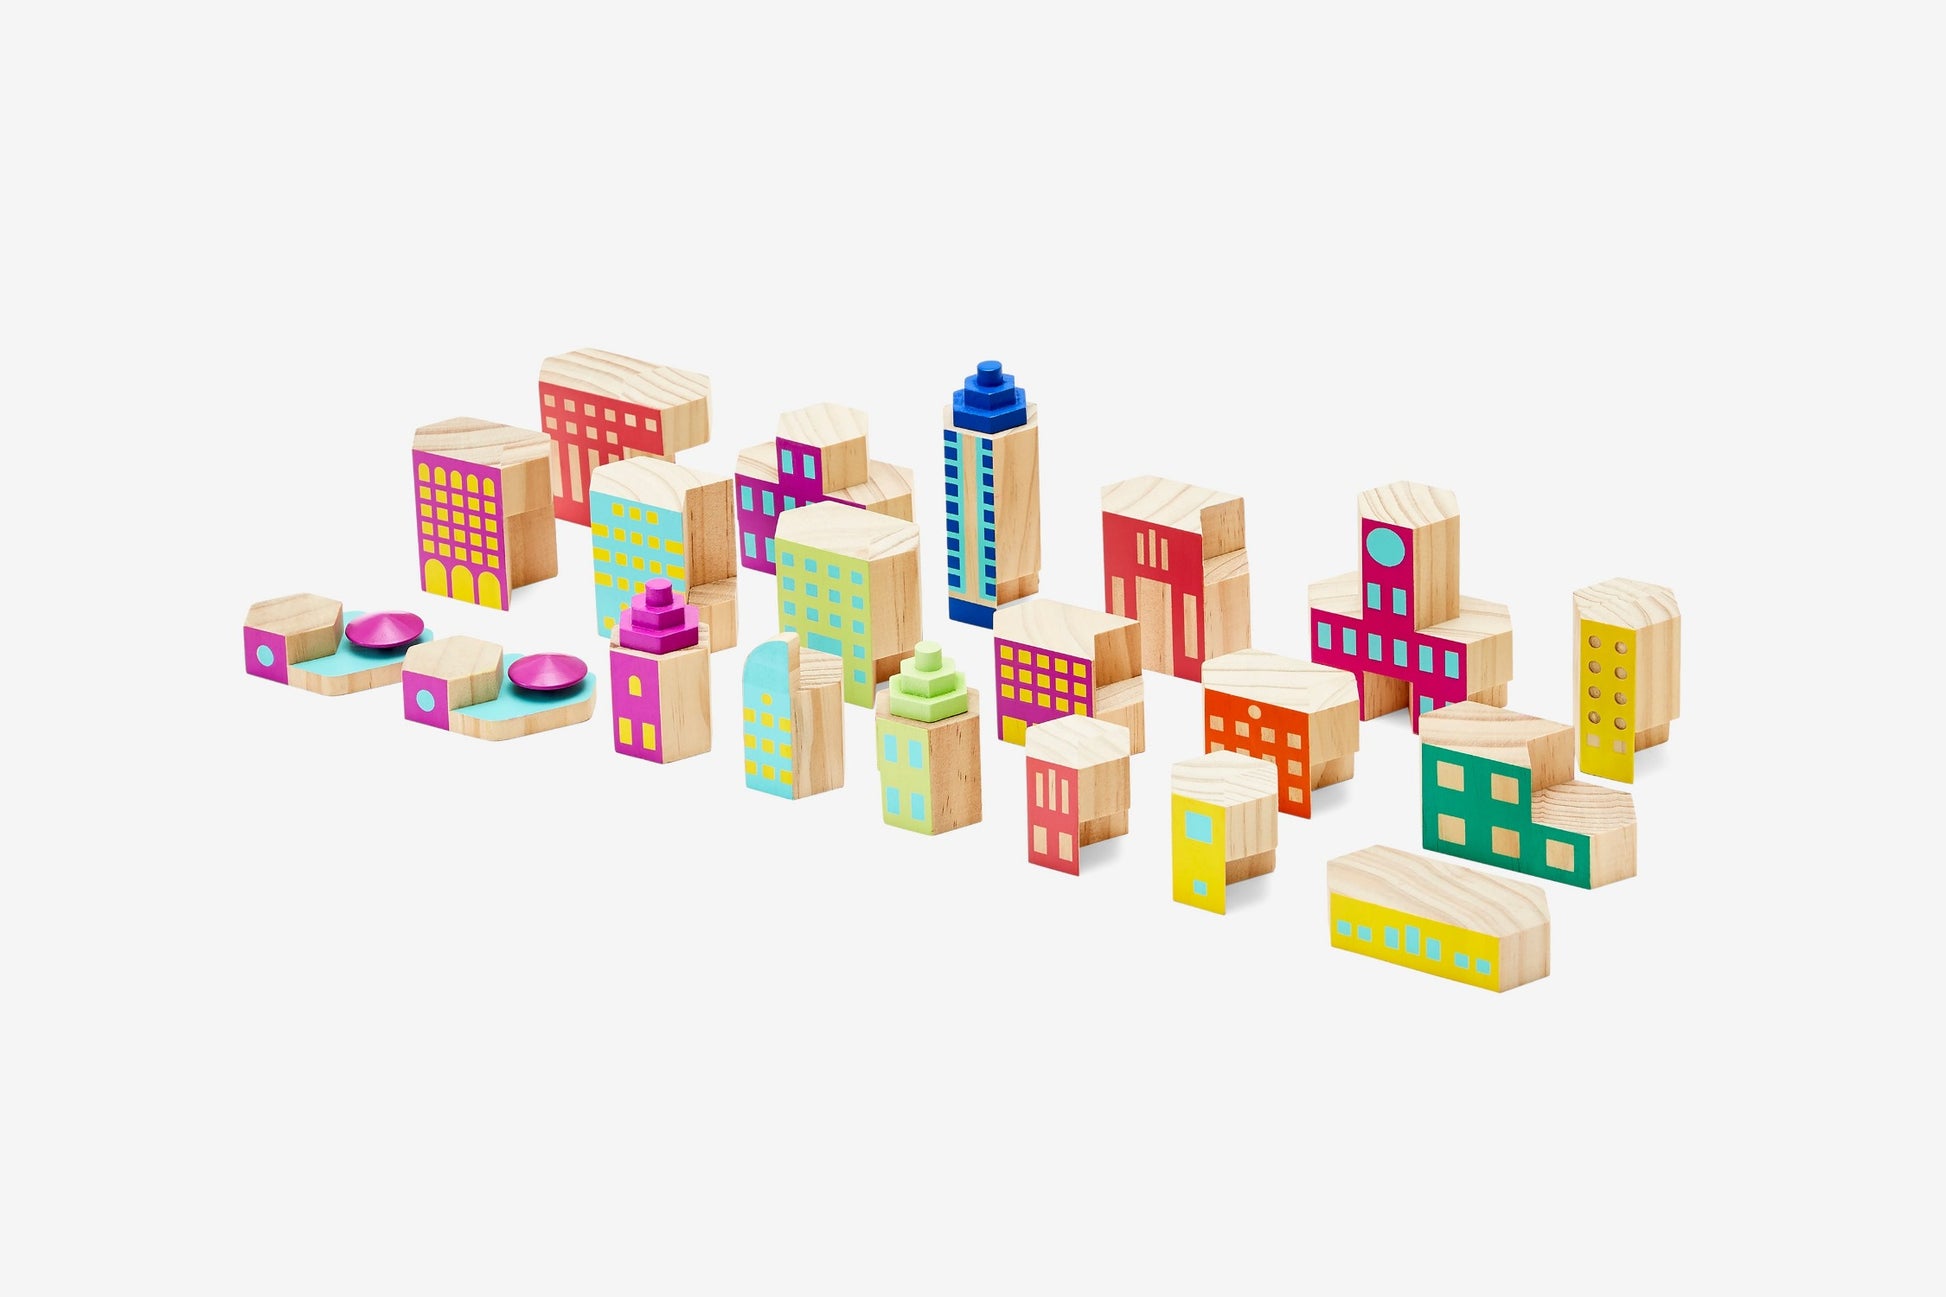 Colourful building blocks in various shapes and sizes painted to look like buildings.